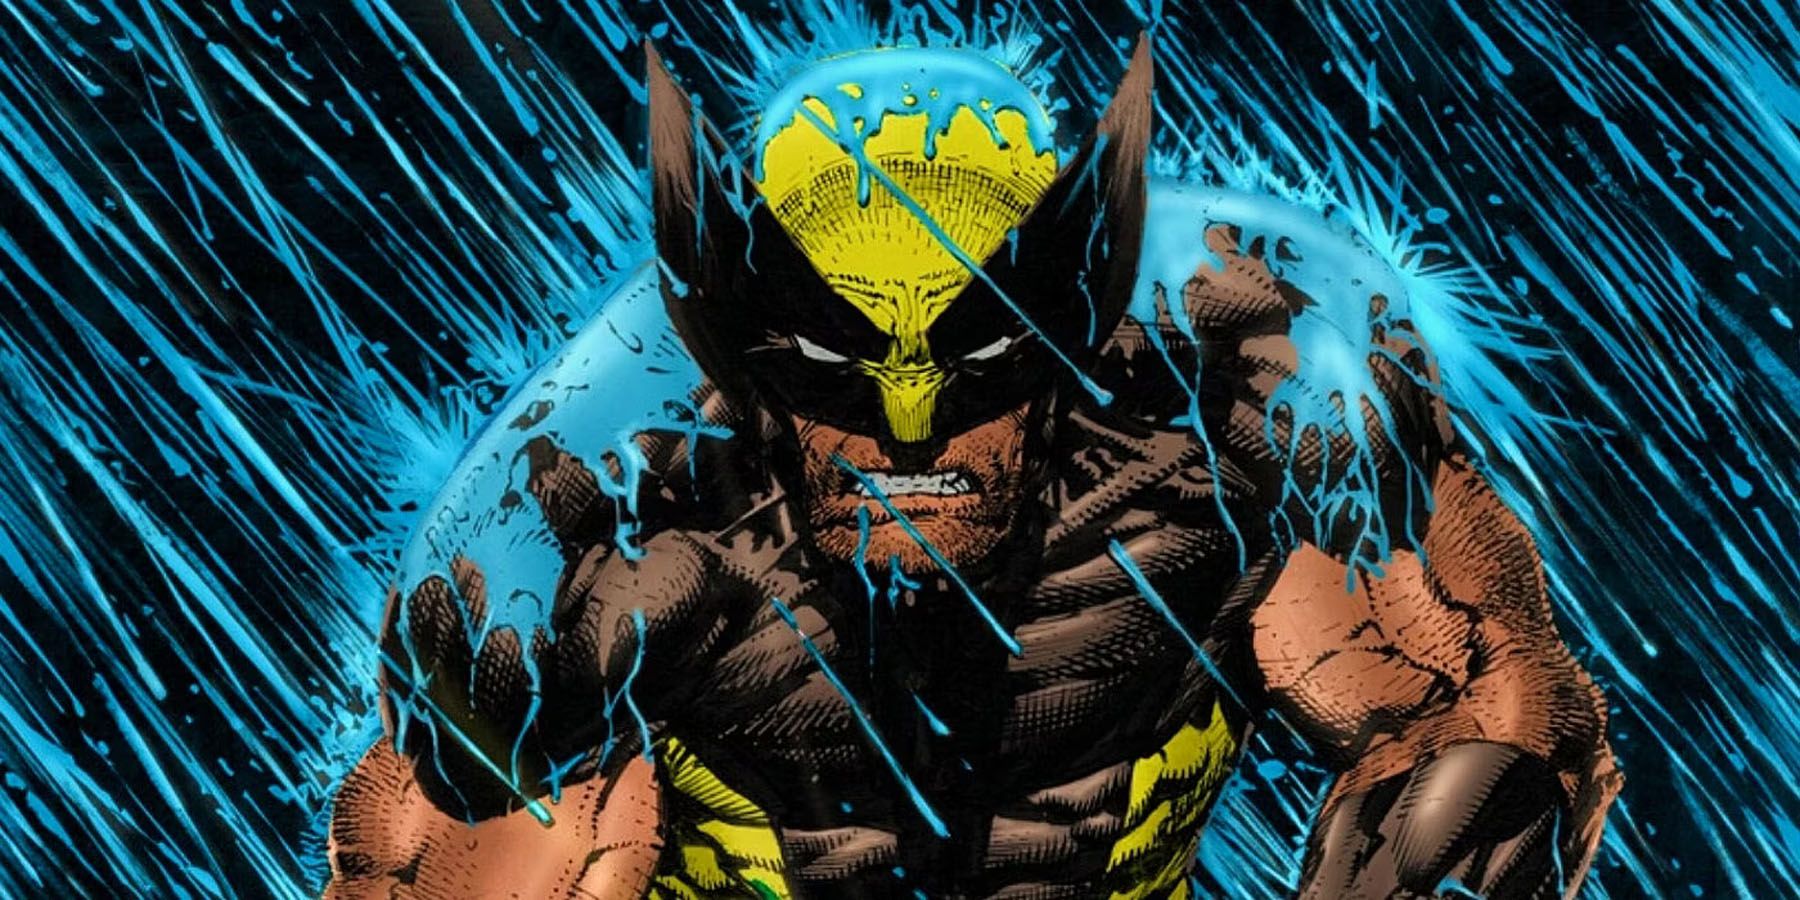 An image of Wolverine brooding in the rain in his classic yellow X-Men costume.